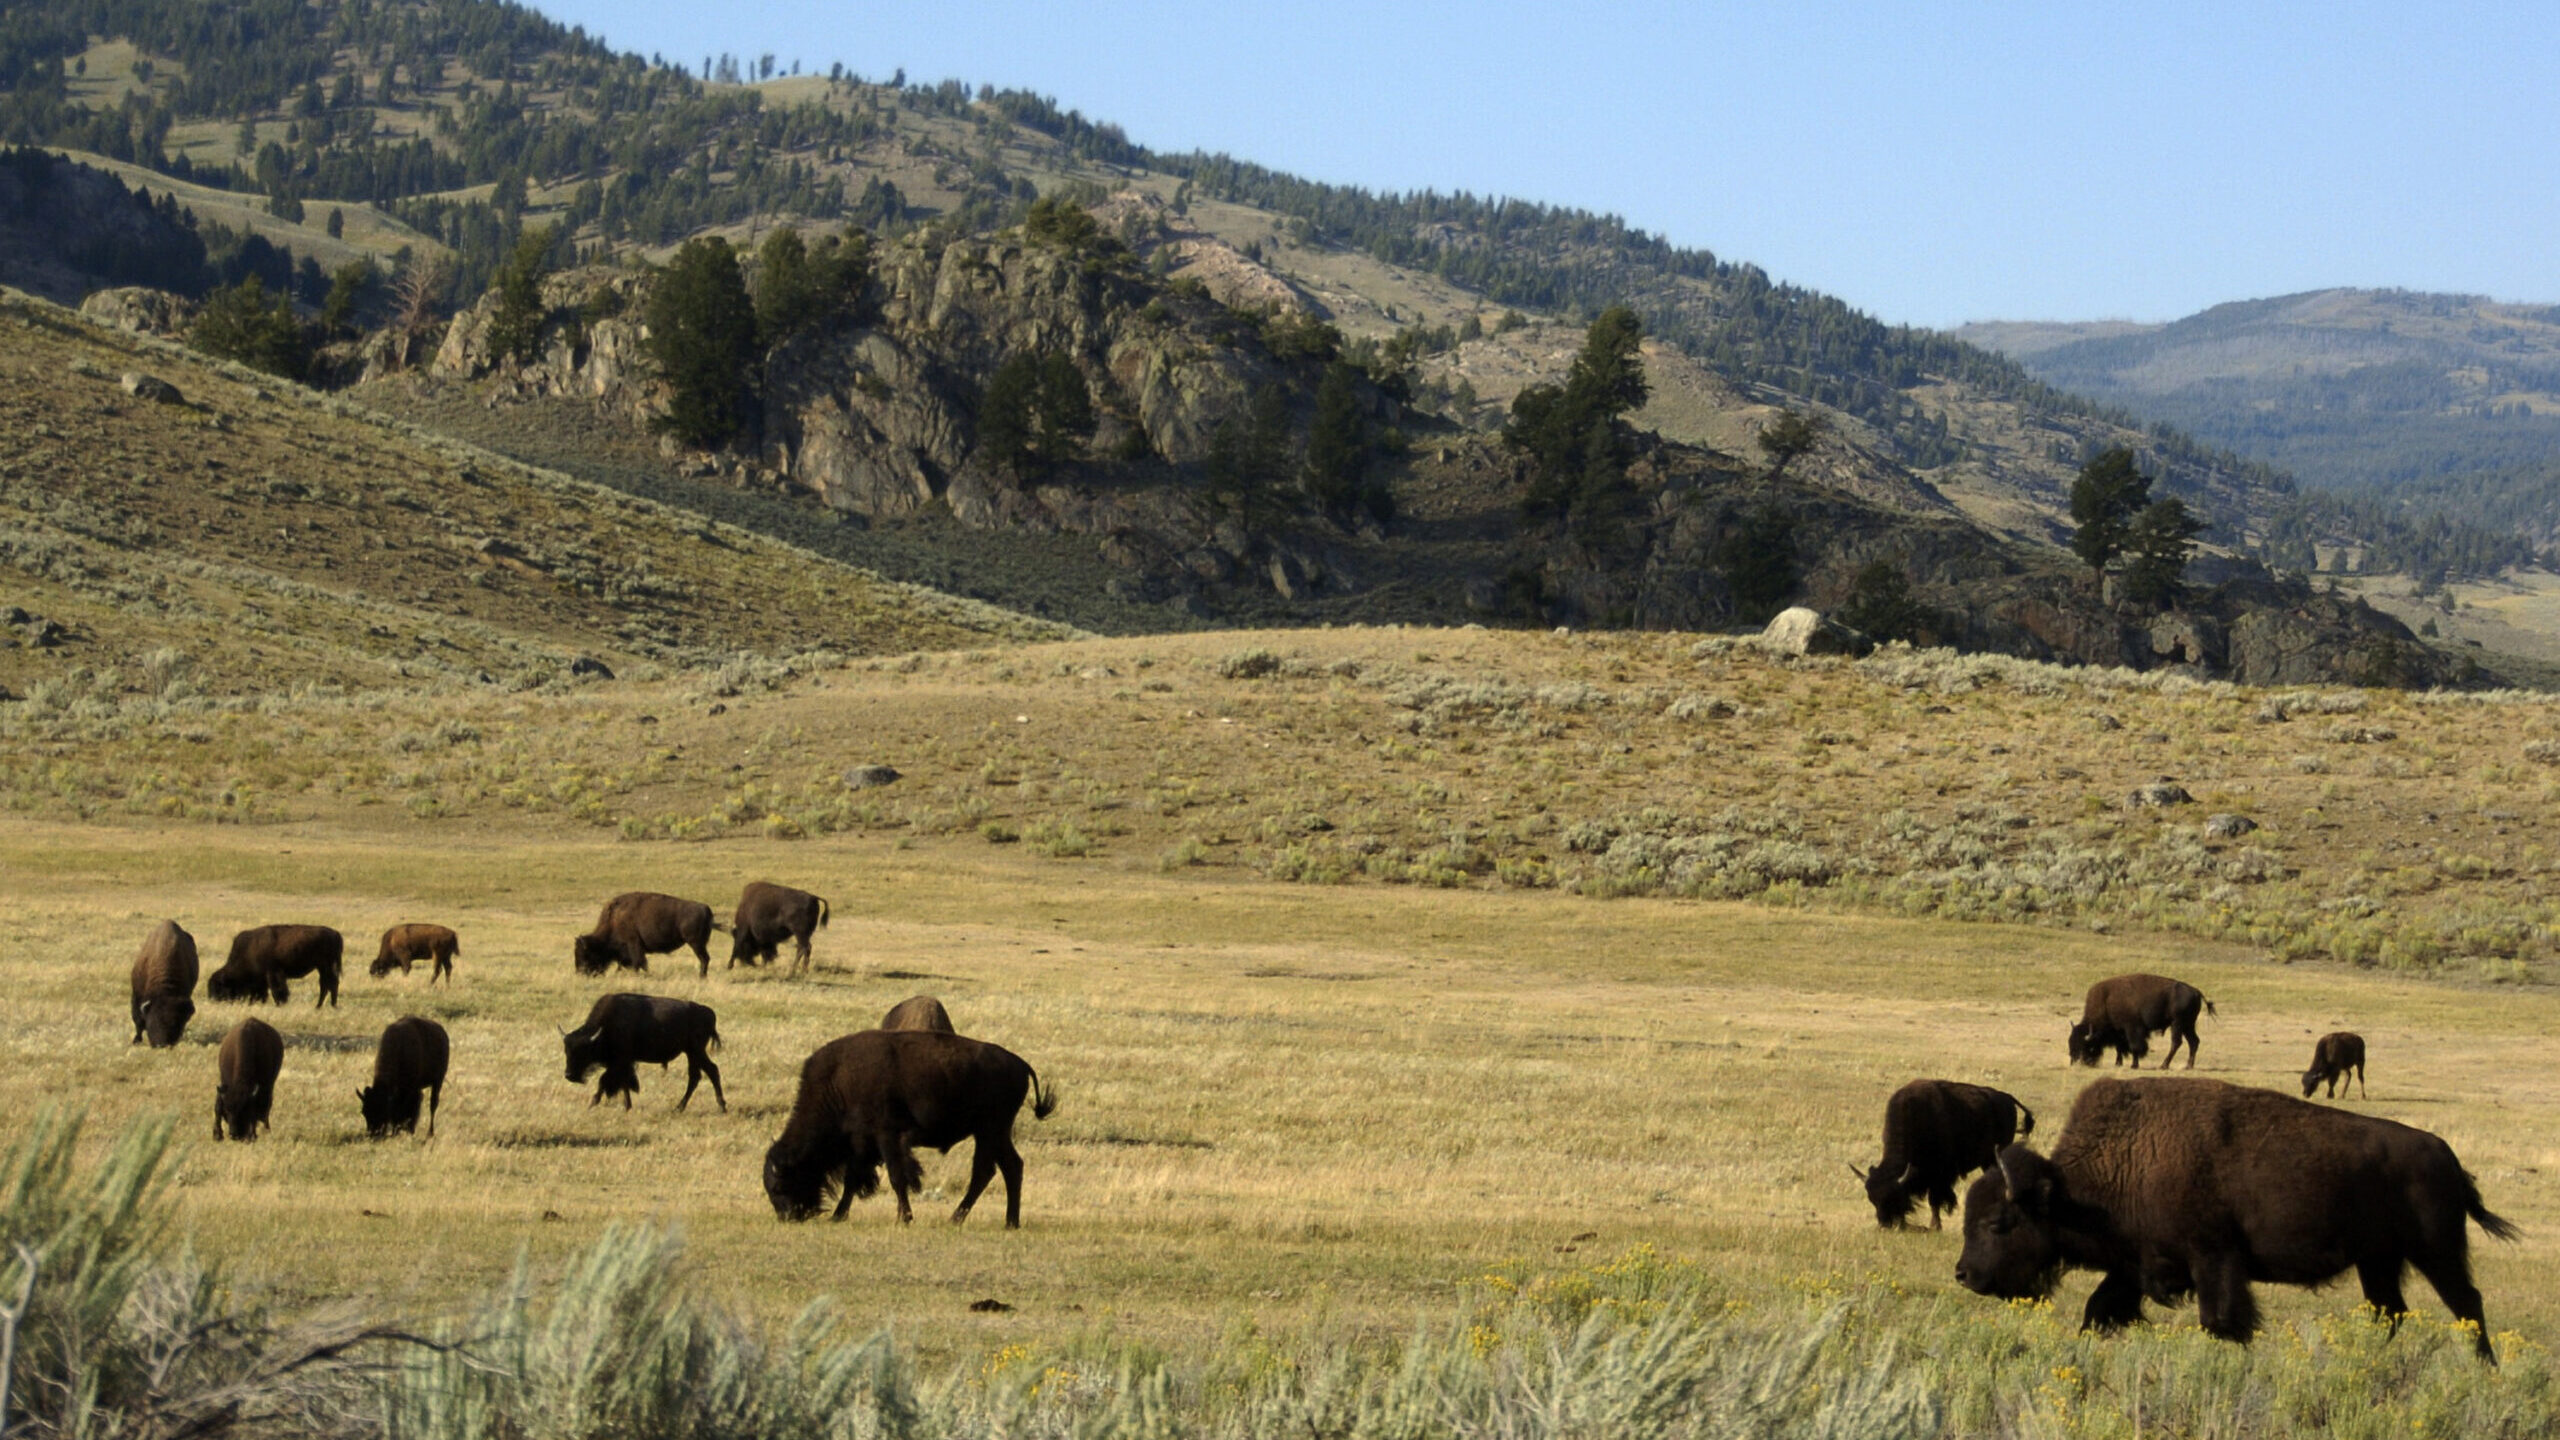 bison in yellowstone pictured, officials say to steer clear of wild animals...